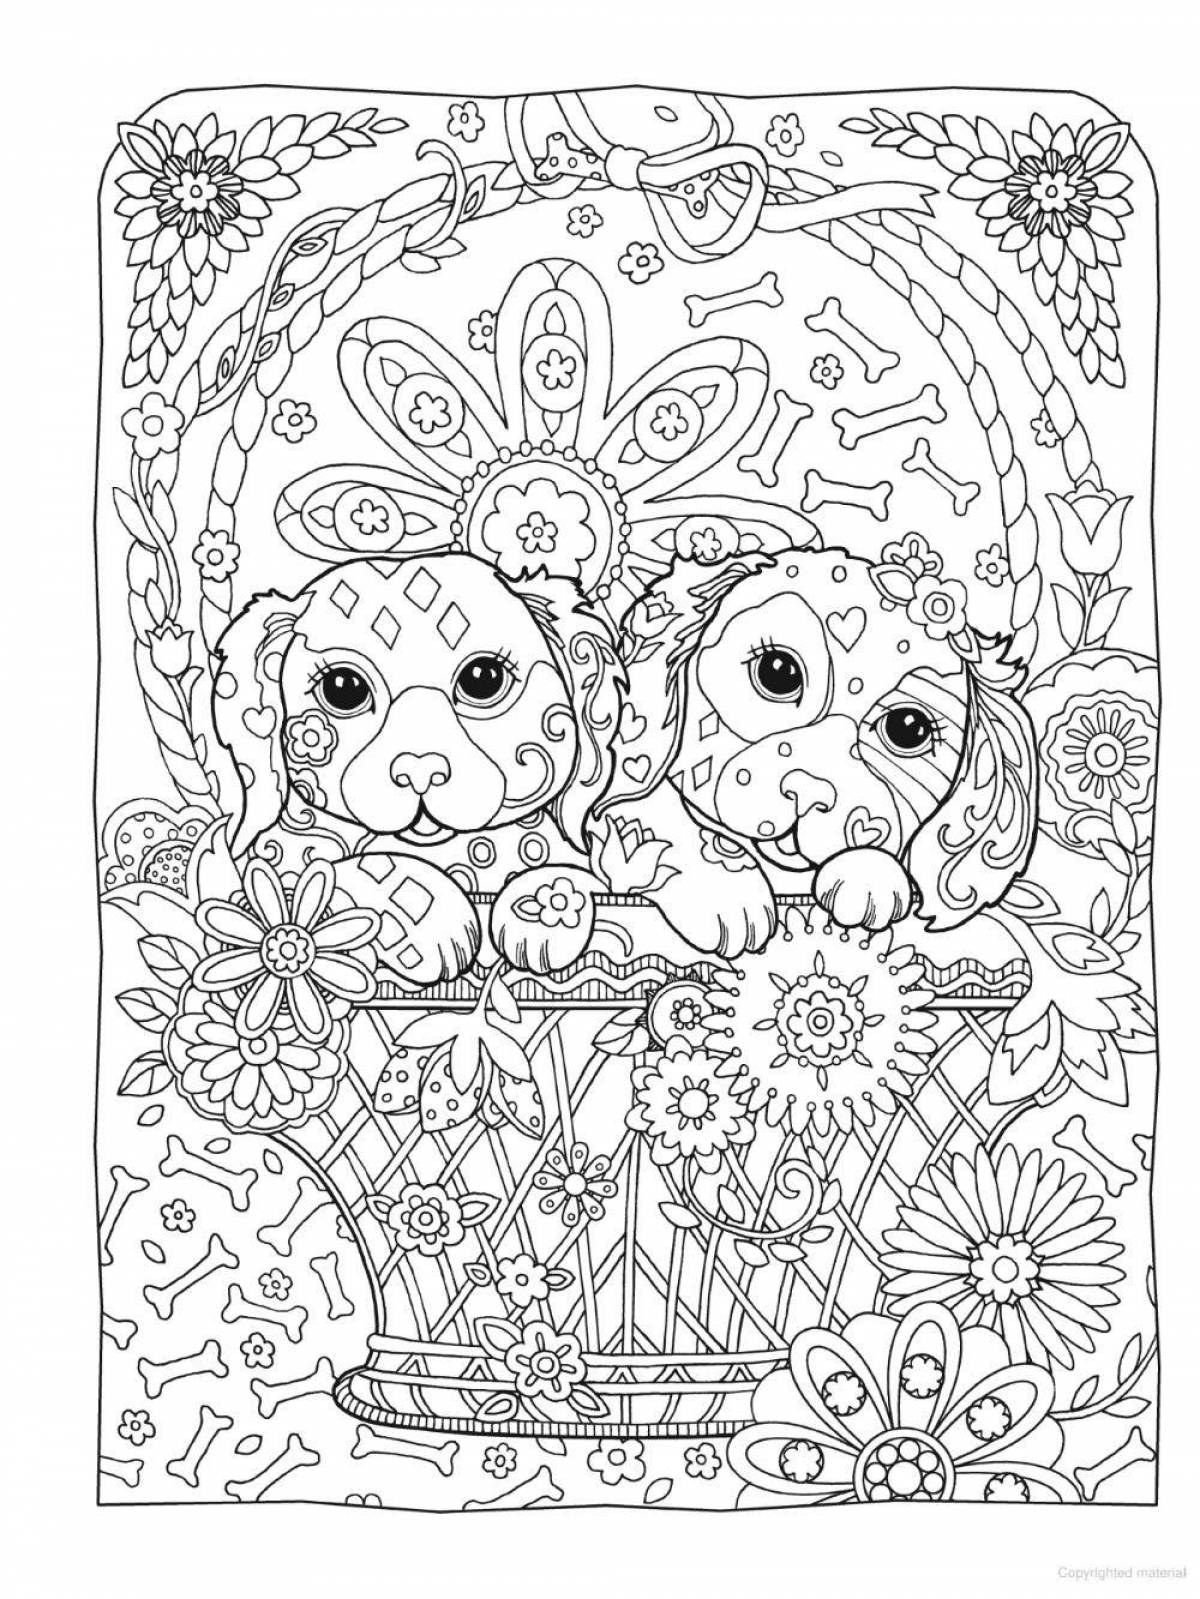 Mystical coloring book for girls 7 years old